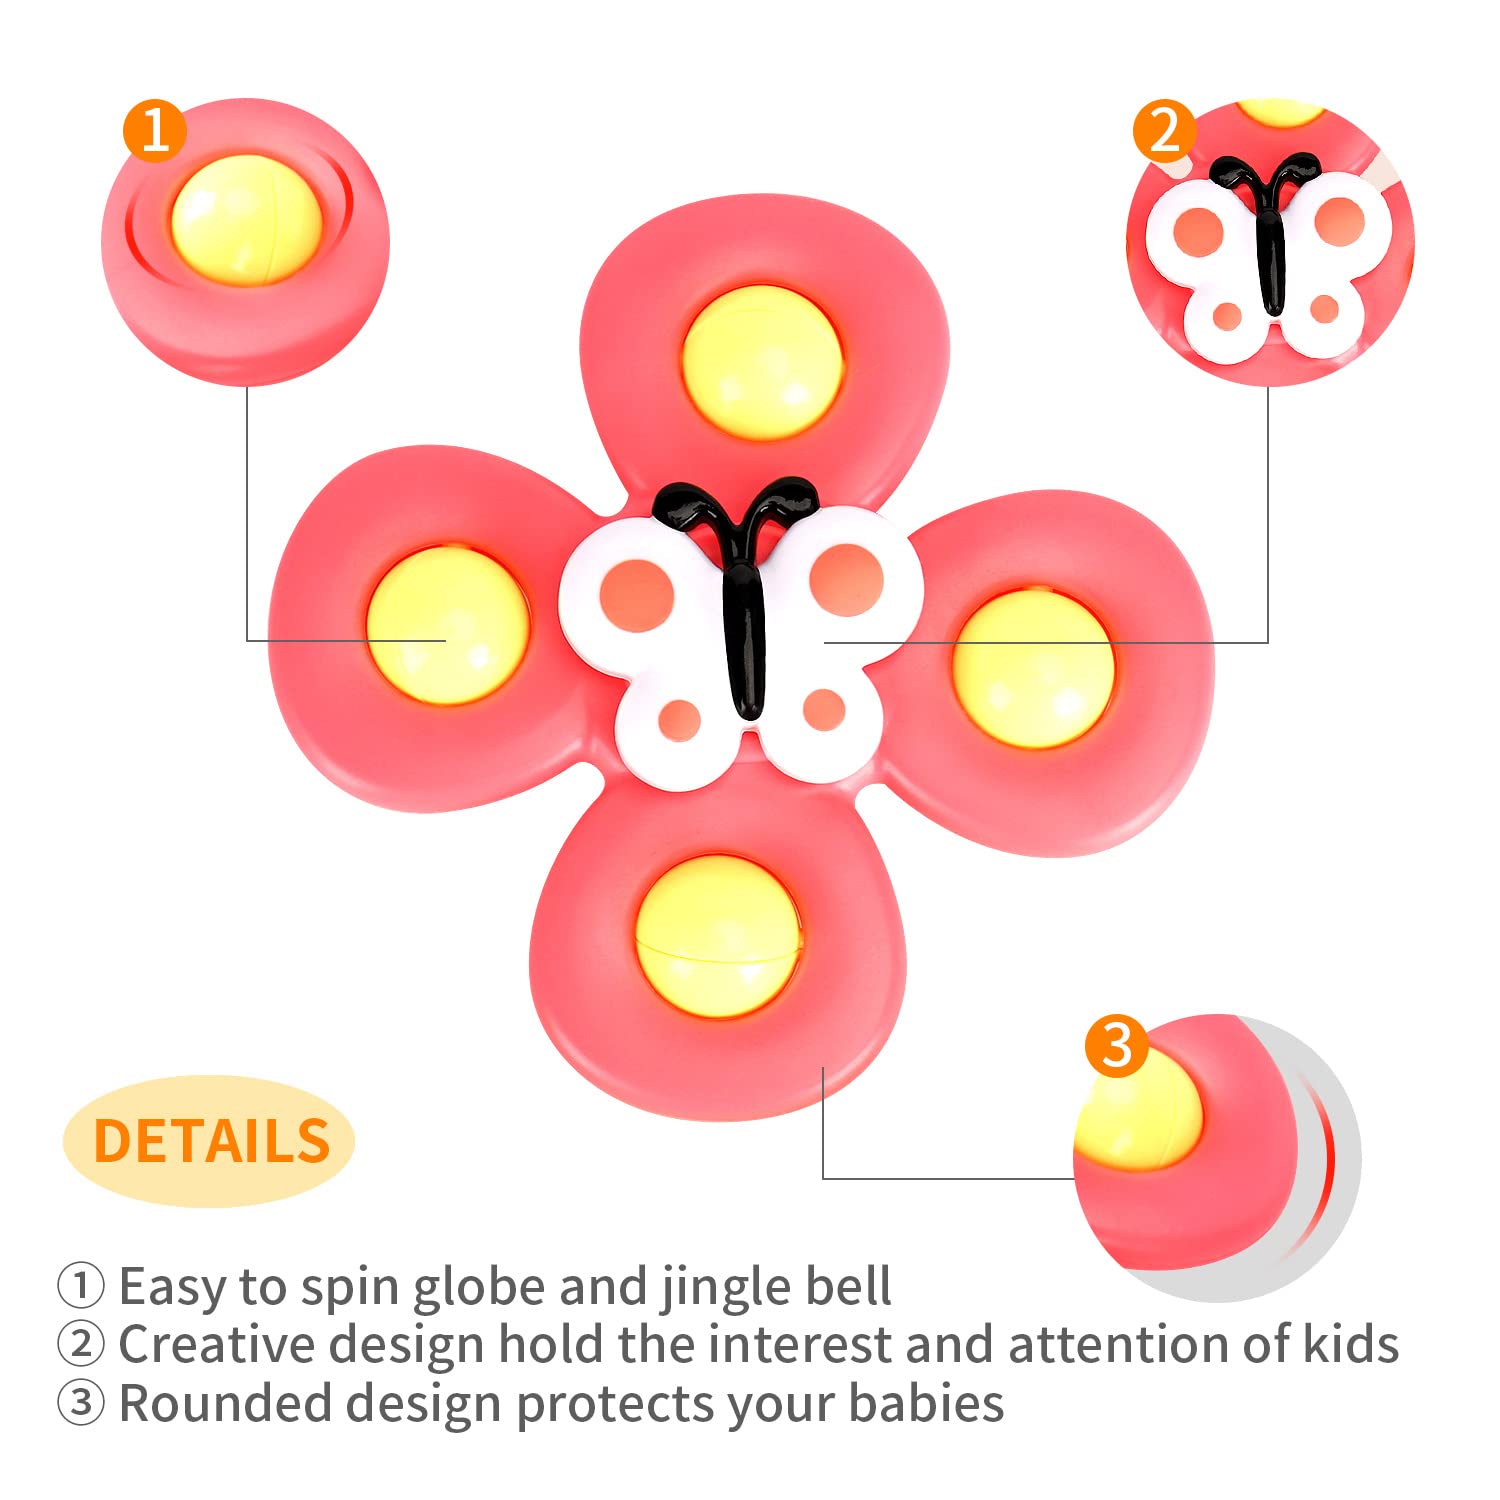 3PCS ALASOU Suction Cup Spinner Toys for 1 2 Year Old Boy&Girl|Spinning Tops Toddler Toys Age 1-2|1 2 Year Old Boy Birthday Gift for Infant|Sensory Baby Bath Toys for Toddlers 1-3